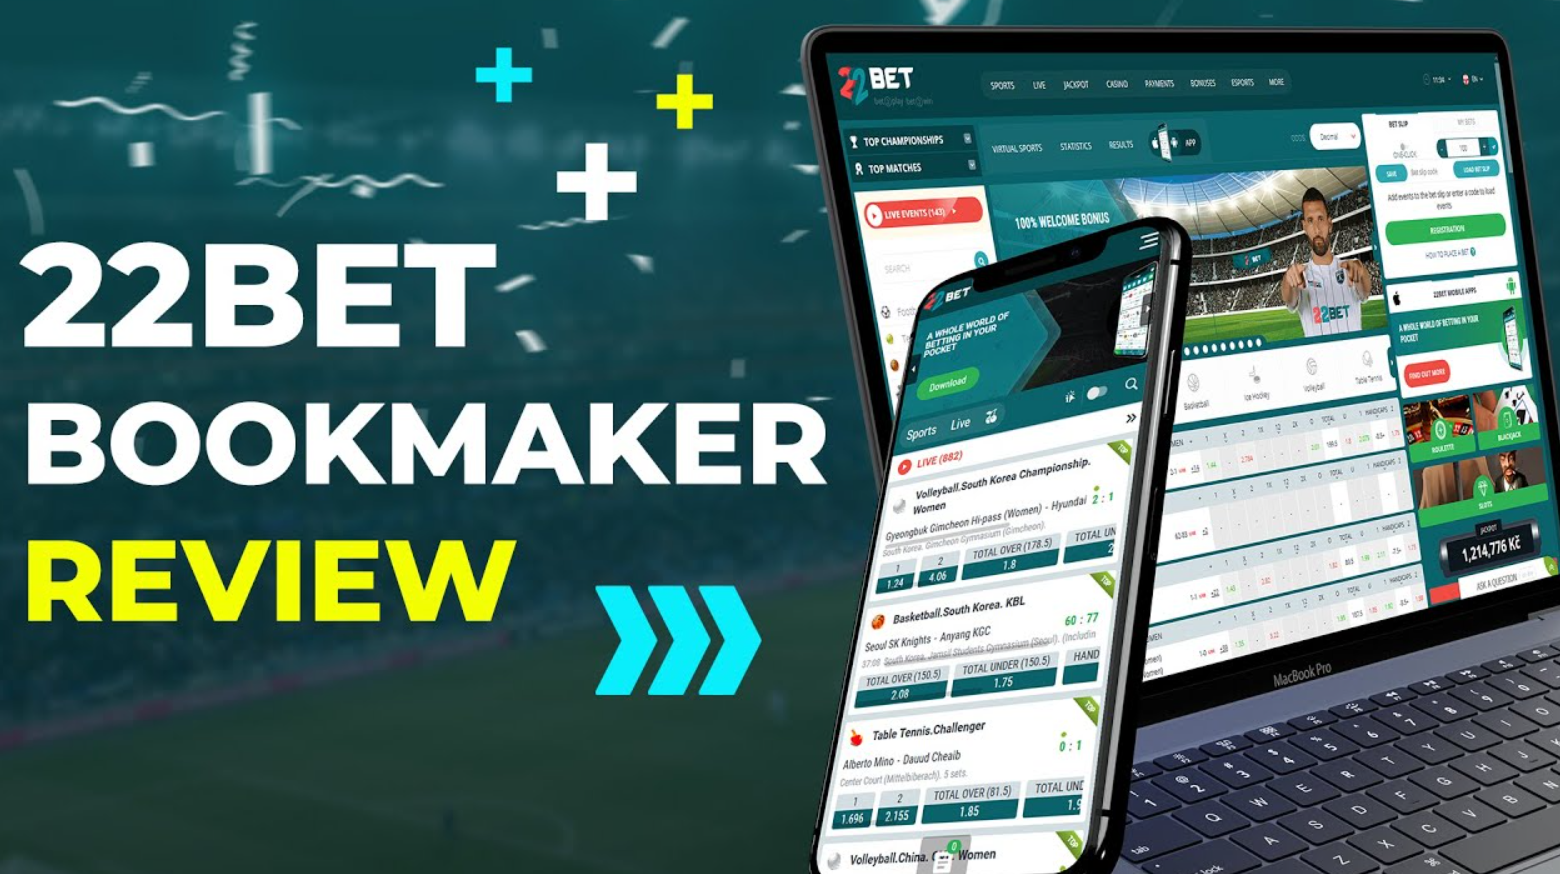 What are the advantages of app Android by 22Bet company?